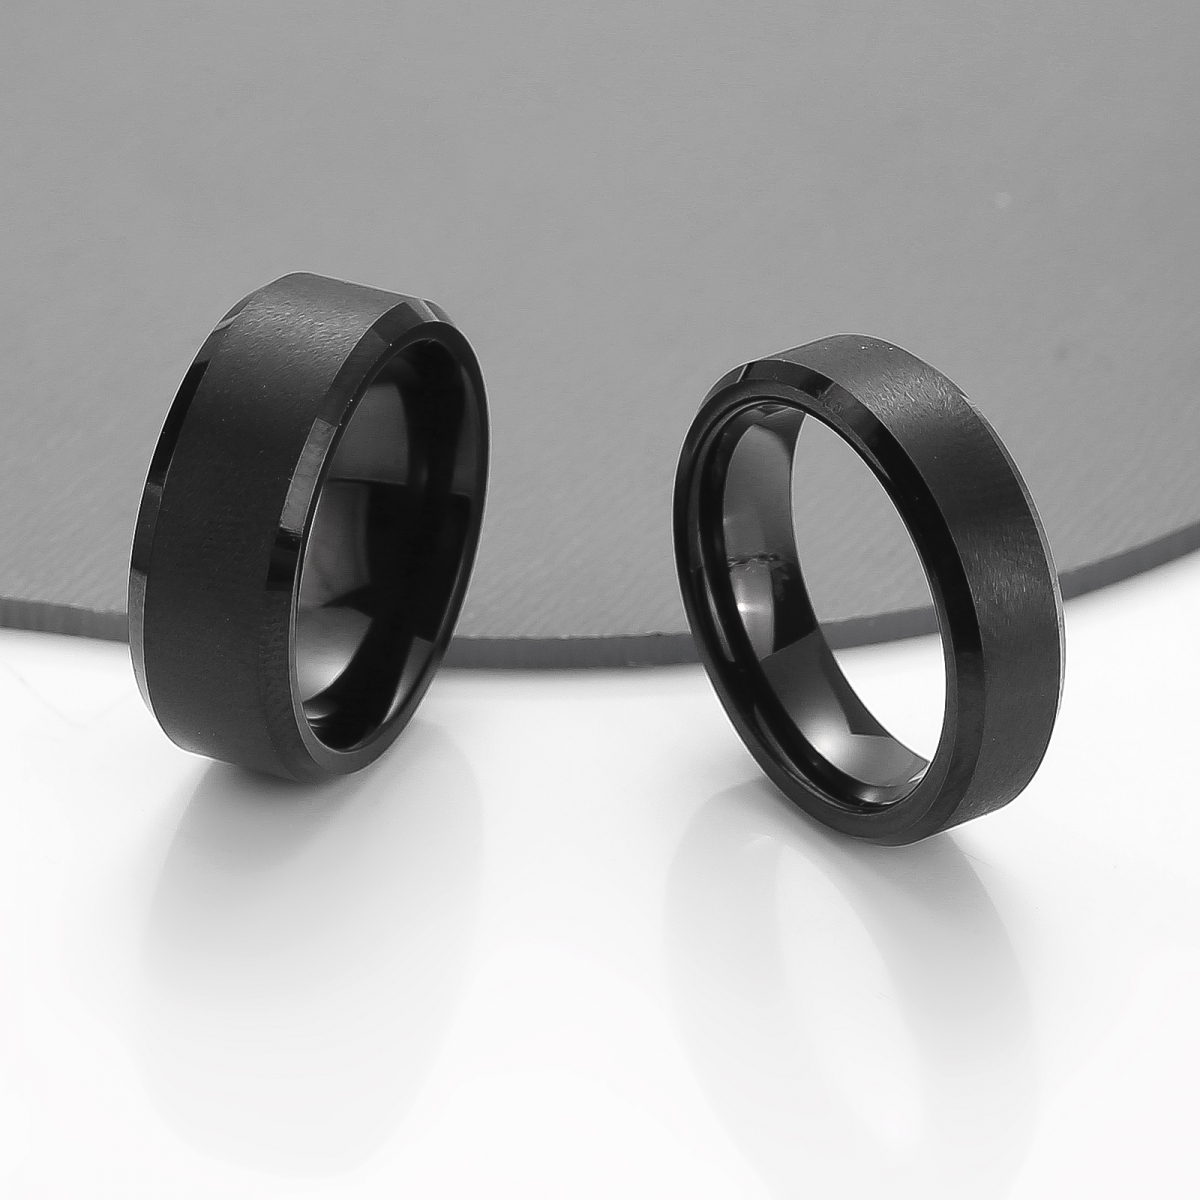 Tungsten Carbide Ring US$3.6/PC-NORSECOLLECTION- Viking Jewelry,Viking Necklace,Viking Bracelet,Viking Rings,Viking Mugs,Viking Accessories,Viking Crafts